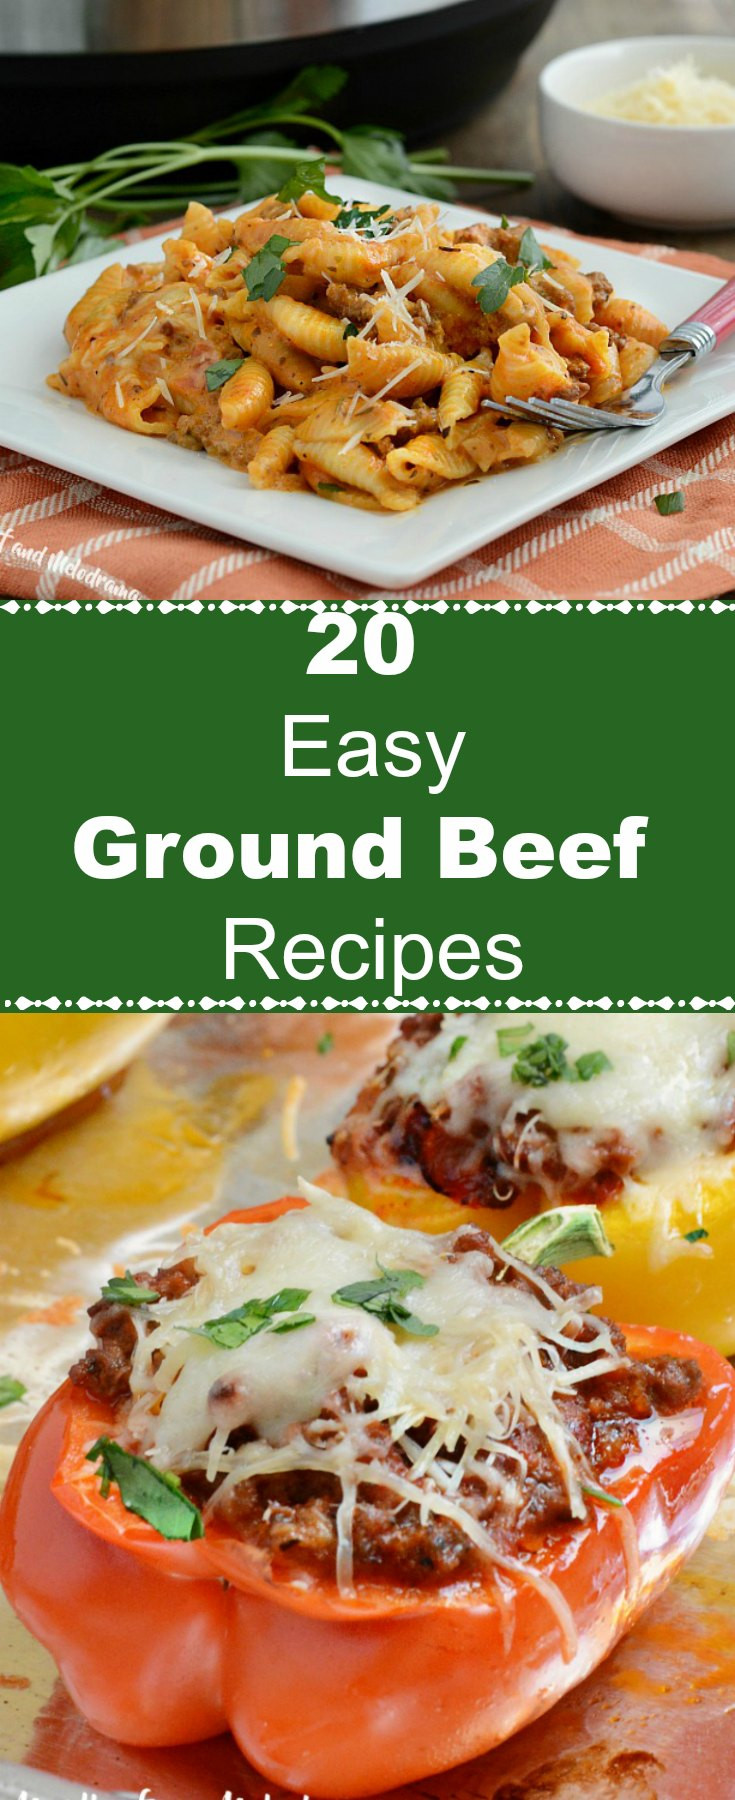 Easy Dishes With Ground Beef
 20 Easy Ground Beef Recipes Meatloaf and Melodrama